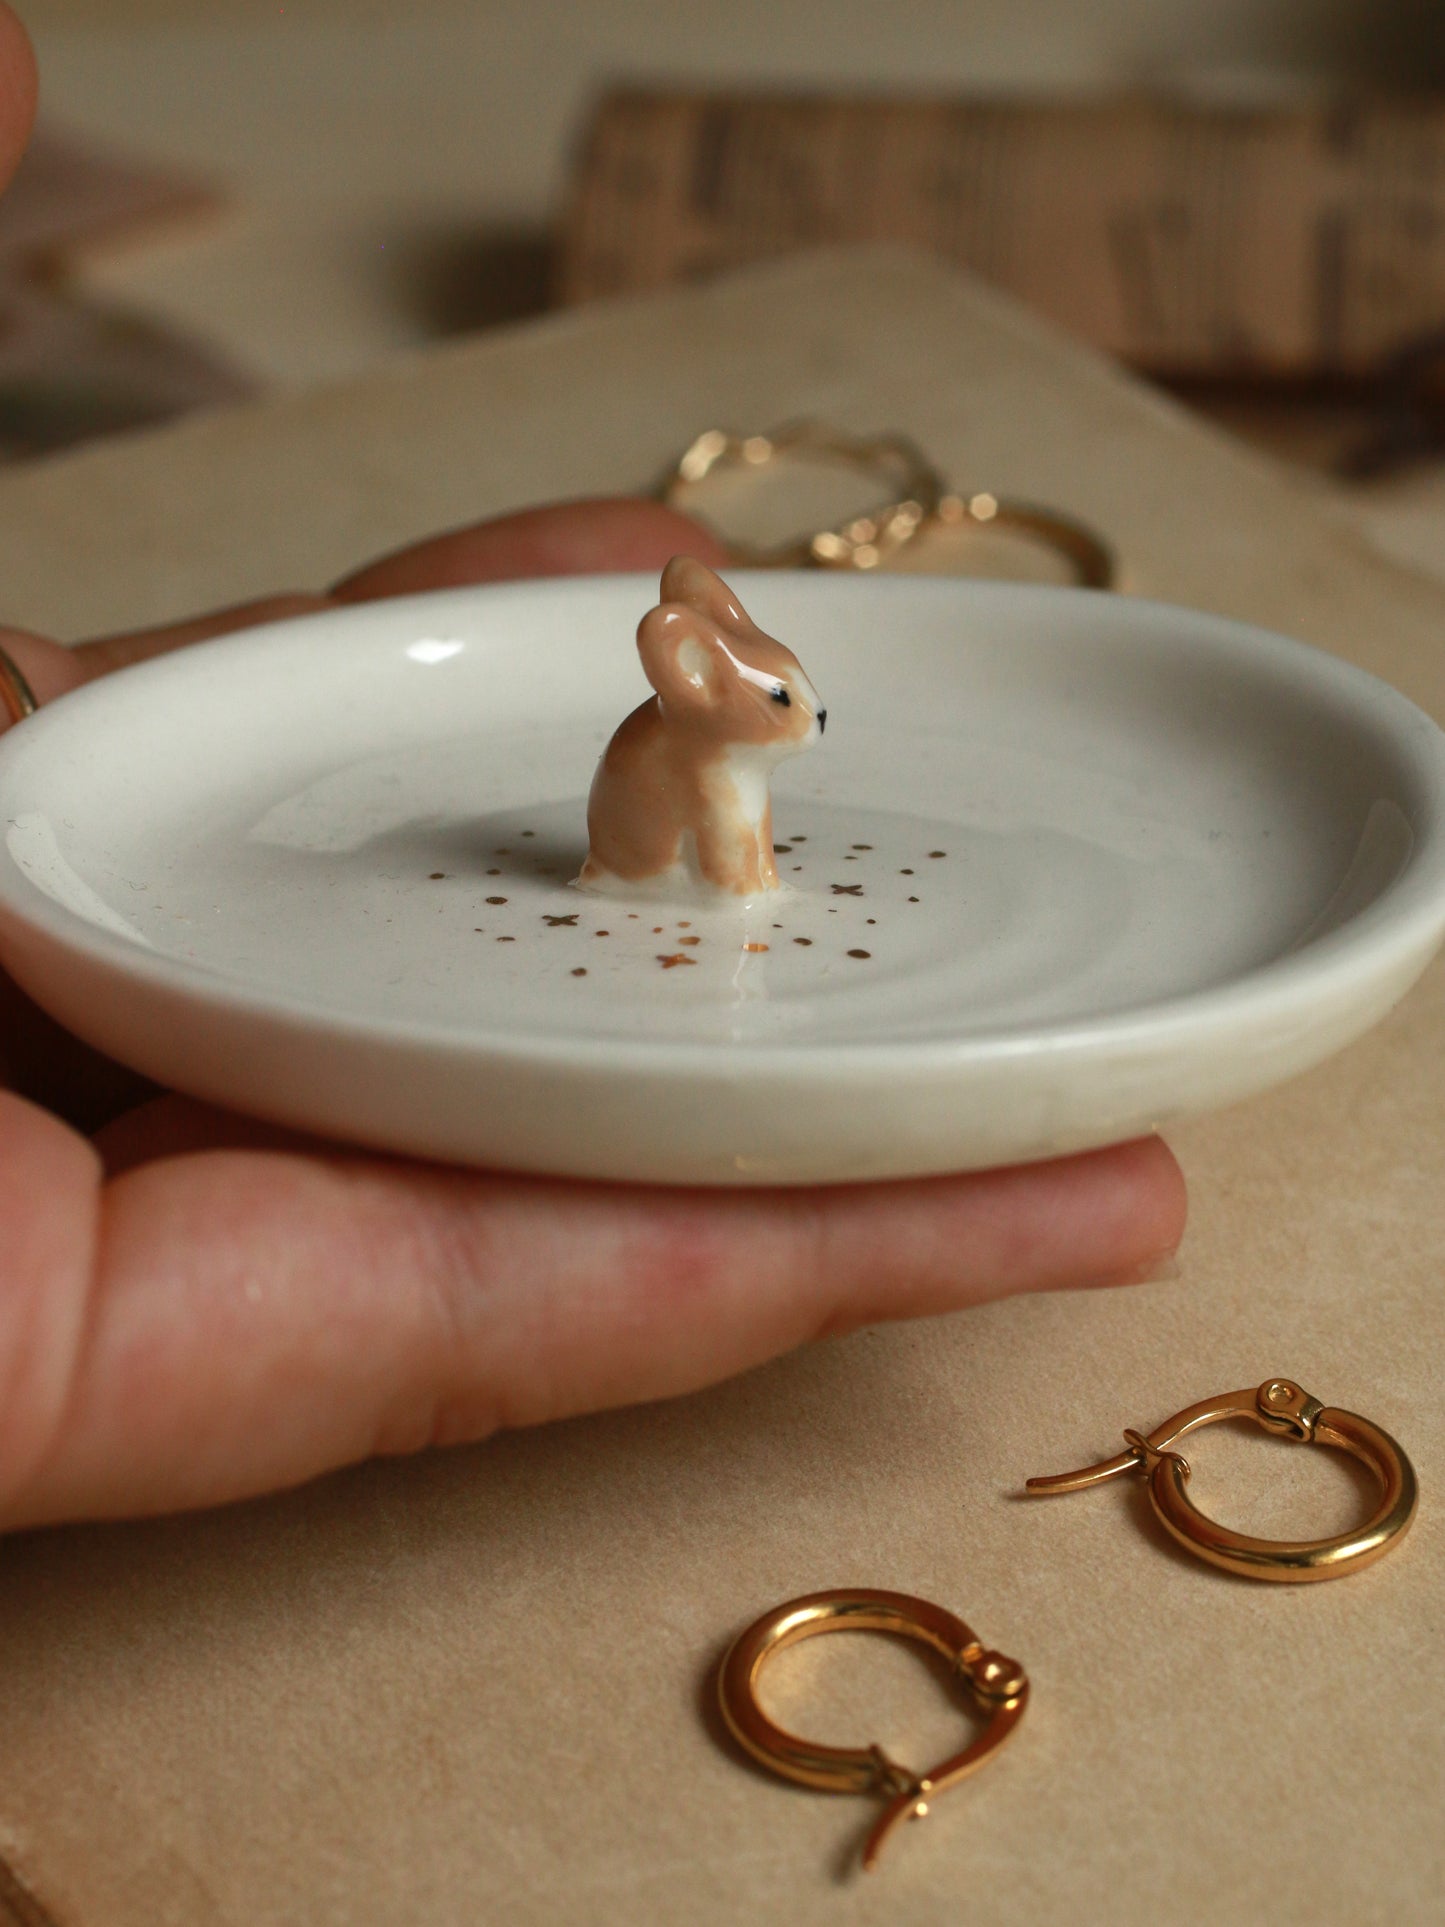 Bunny Ring Dish - Porcelain jewelry dish